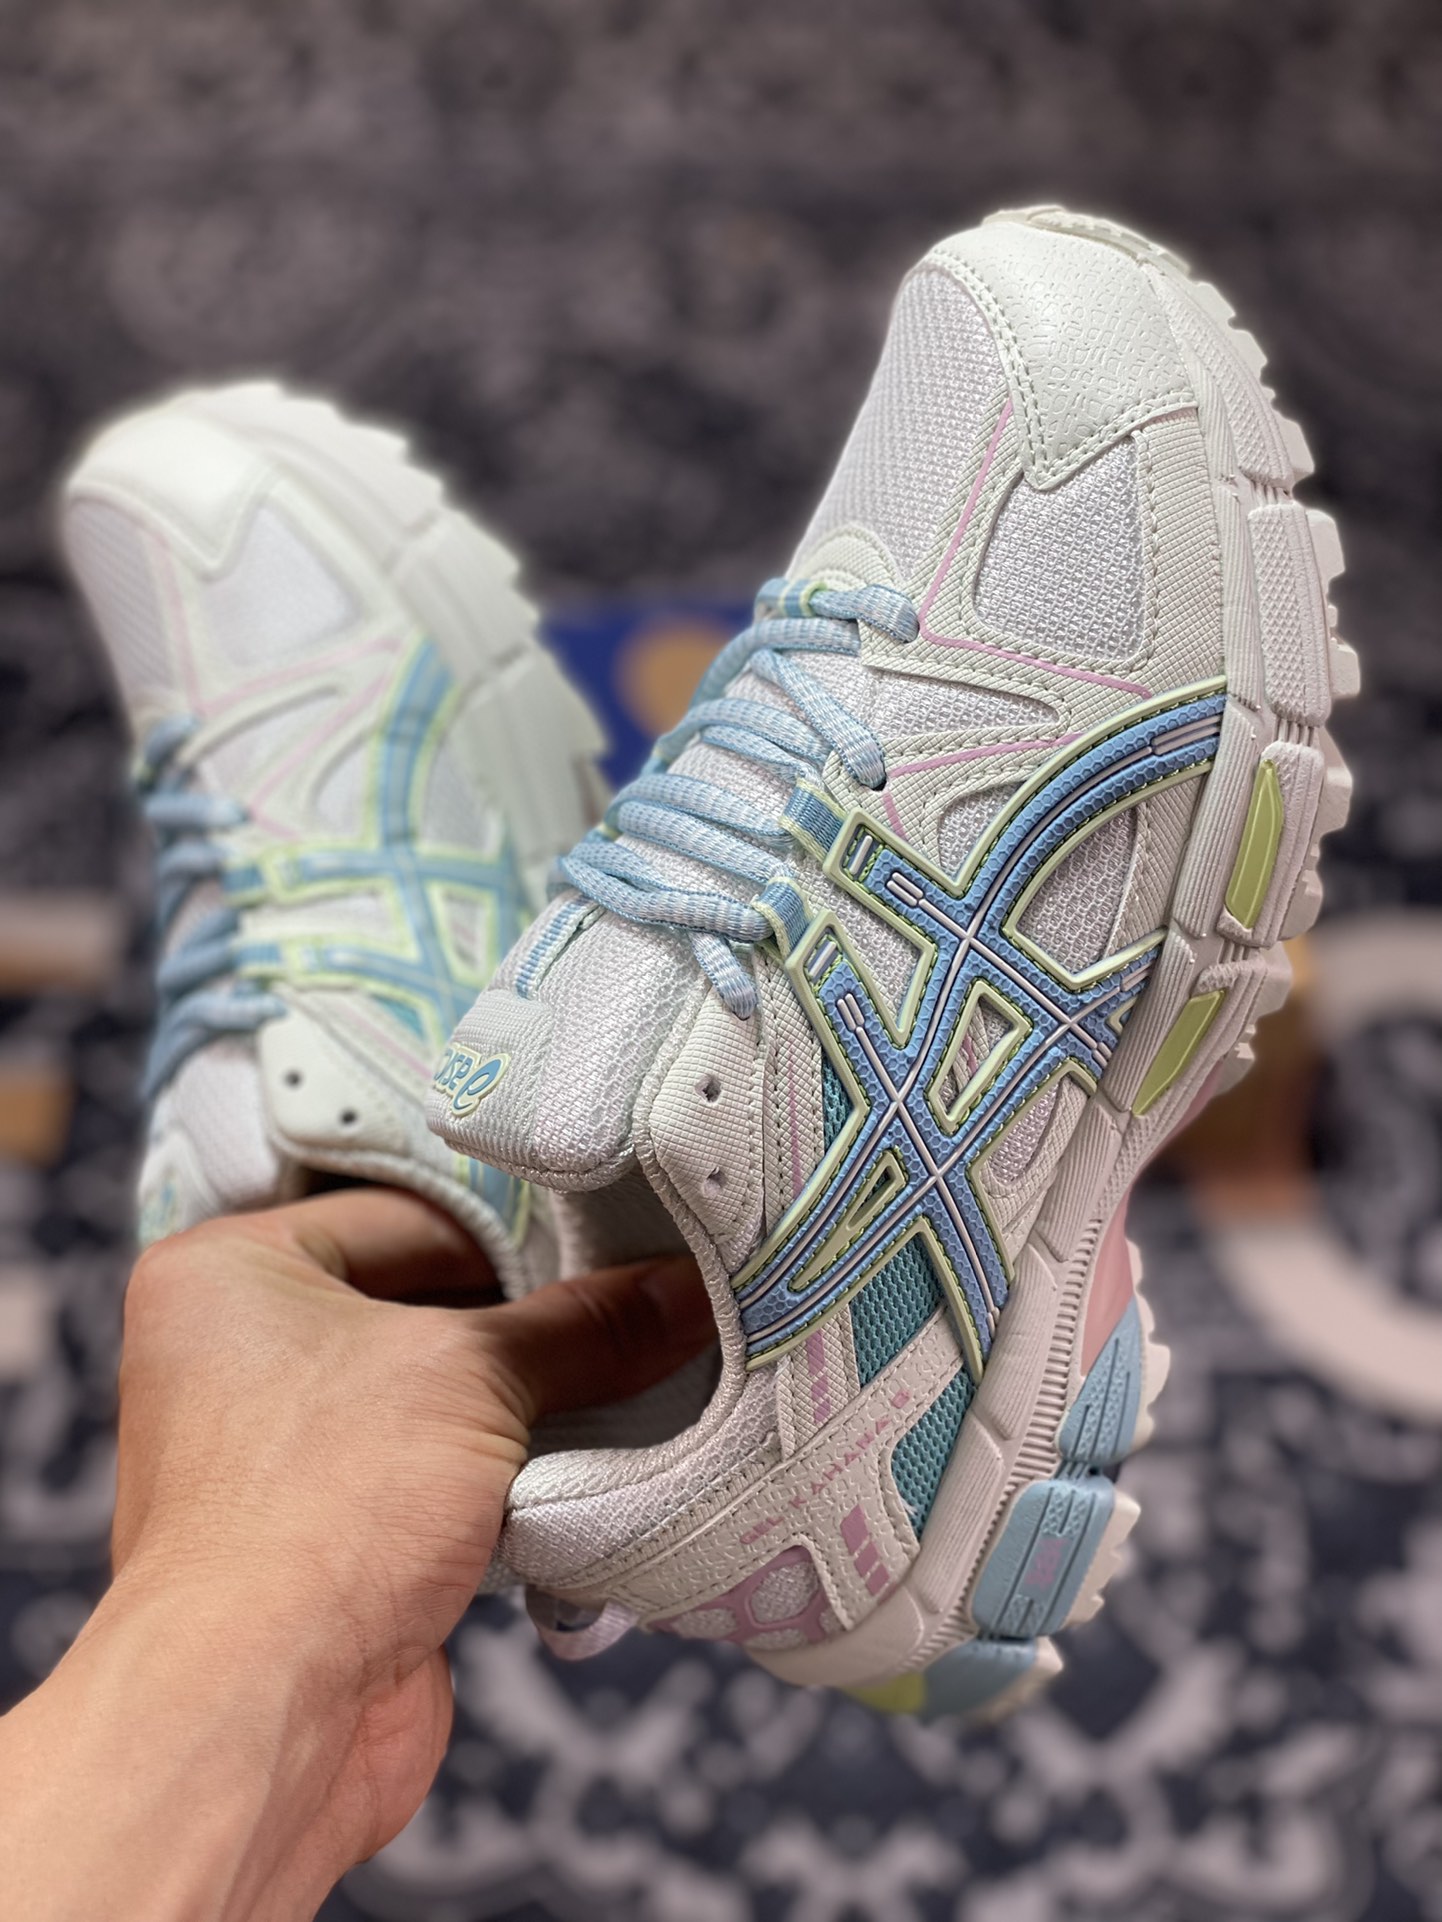 Asics Gel-Kahana 8 series white, pink and blue classic outdoor running shoes 1012A978-301